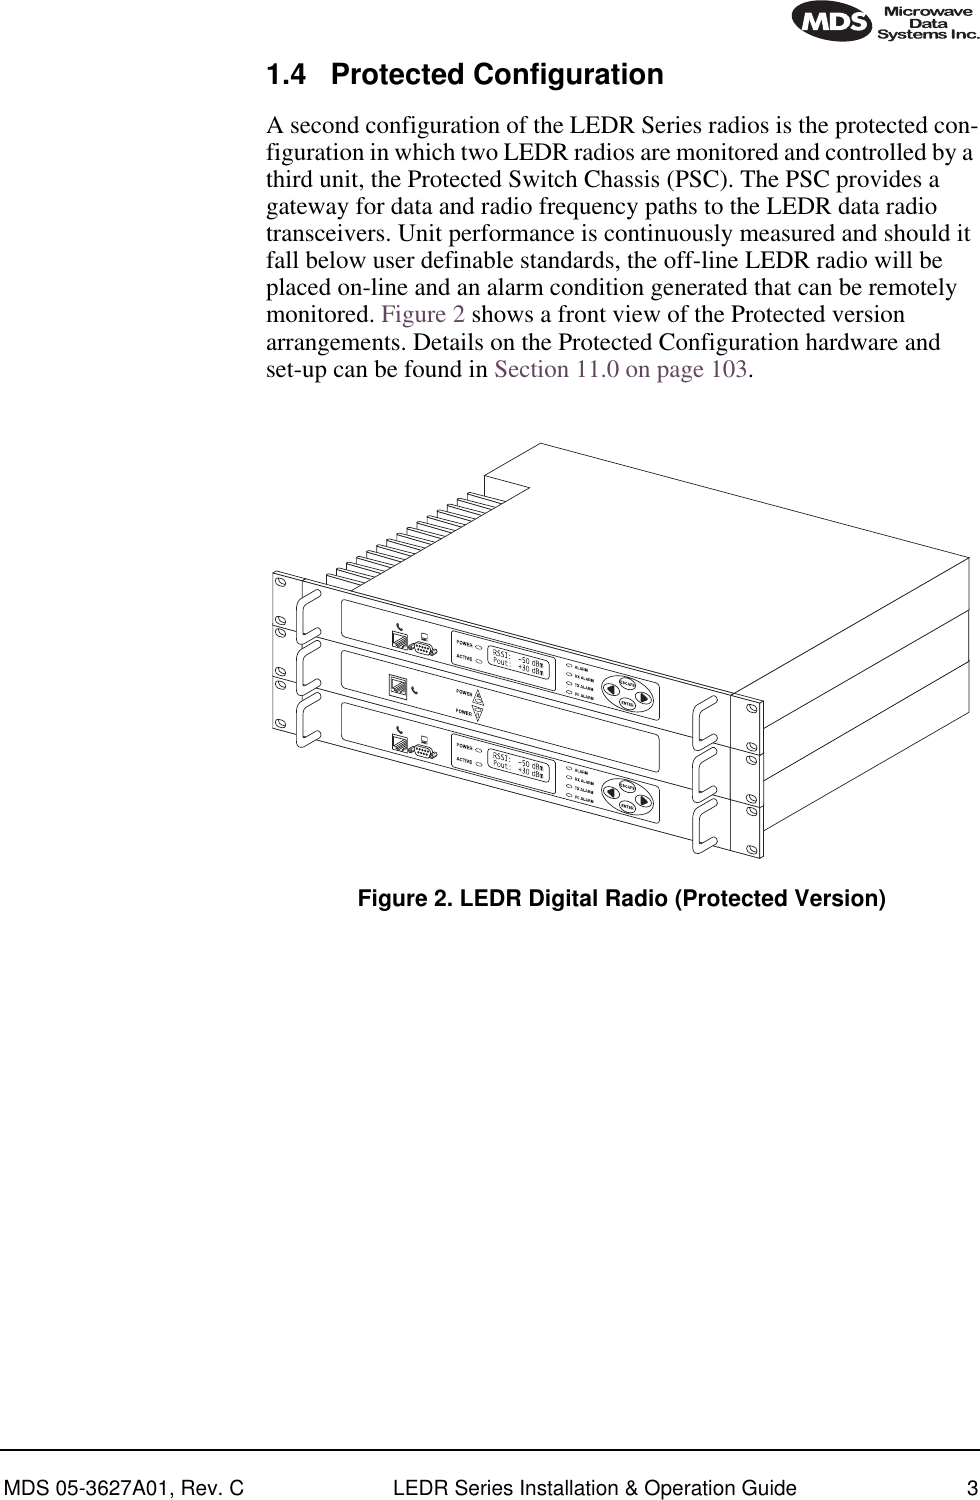  MDS 05-3627A01, Rev. C LEDR Series Installation &amp; Operation Guide 3 1.4 Protected Configuration A second configuration of the LEDR Series radios is the protected con-figuration in which two LEDR radios are monitored and controlled by a third unit, the Protected Switch Chassis (PSC). The PSC provides a gateway for data and radio frequency paths to the LEDR data radio transceivers. Unit performance is continuously measured and should it fall below user definable standards, the off-line LEDR radio will be placed on-line and an alarm condition generated that can be remotely monitored. Figure 2 shows a front view of the Protected version arrangements. Details on the Protected Configuration hardware and set-up can be found in Section 11.0 on page 103. Invisible place holder Figure 2. LEDR Digital Radio (Protected Version)